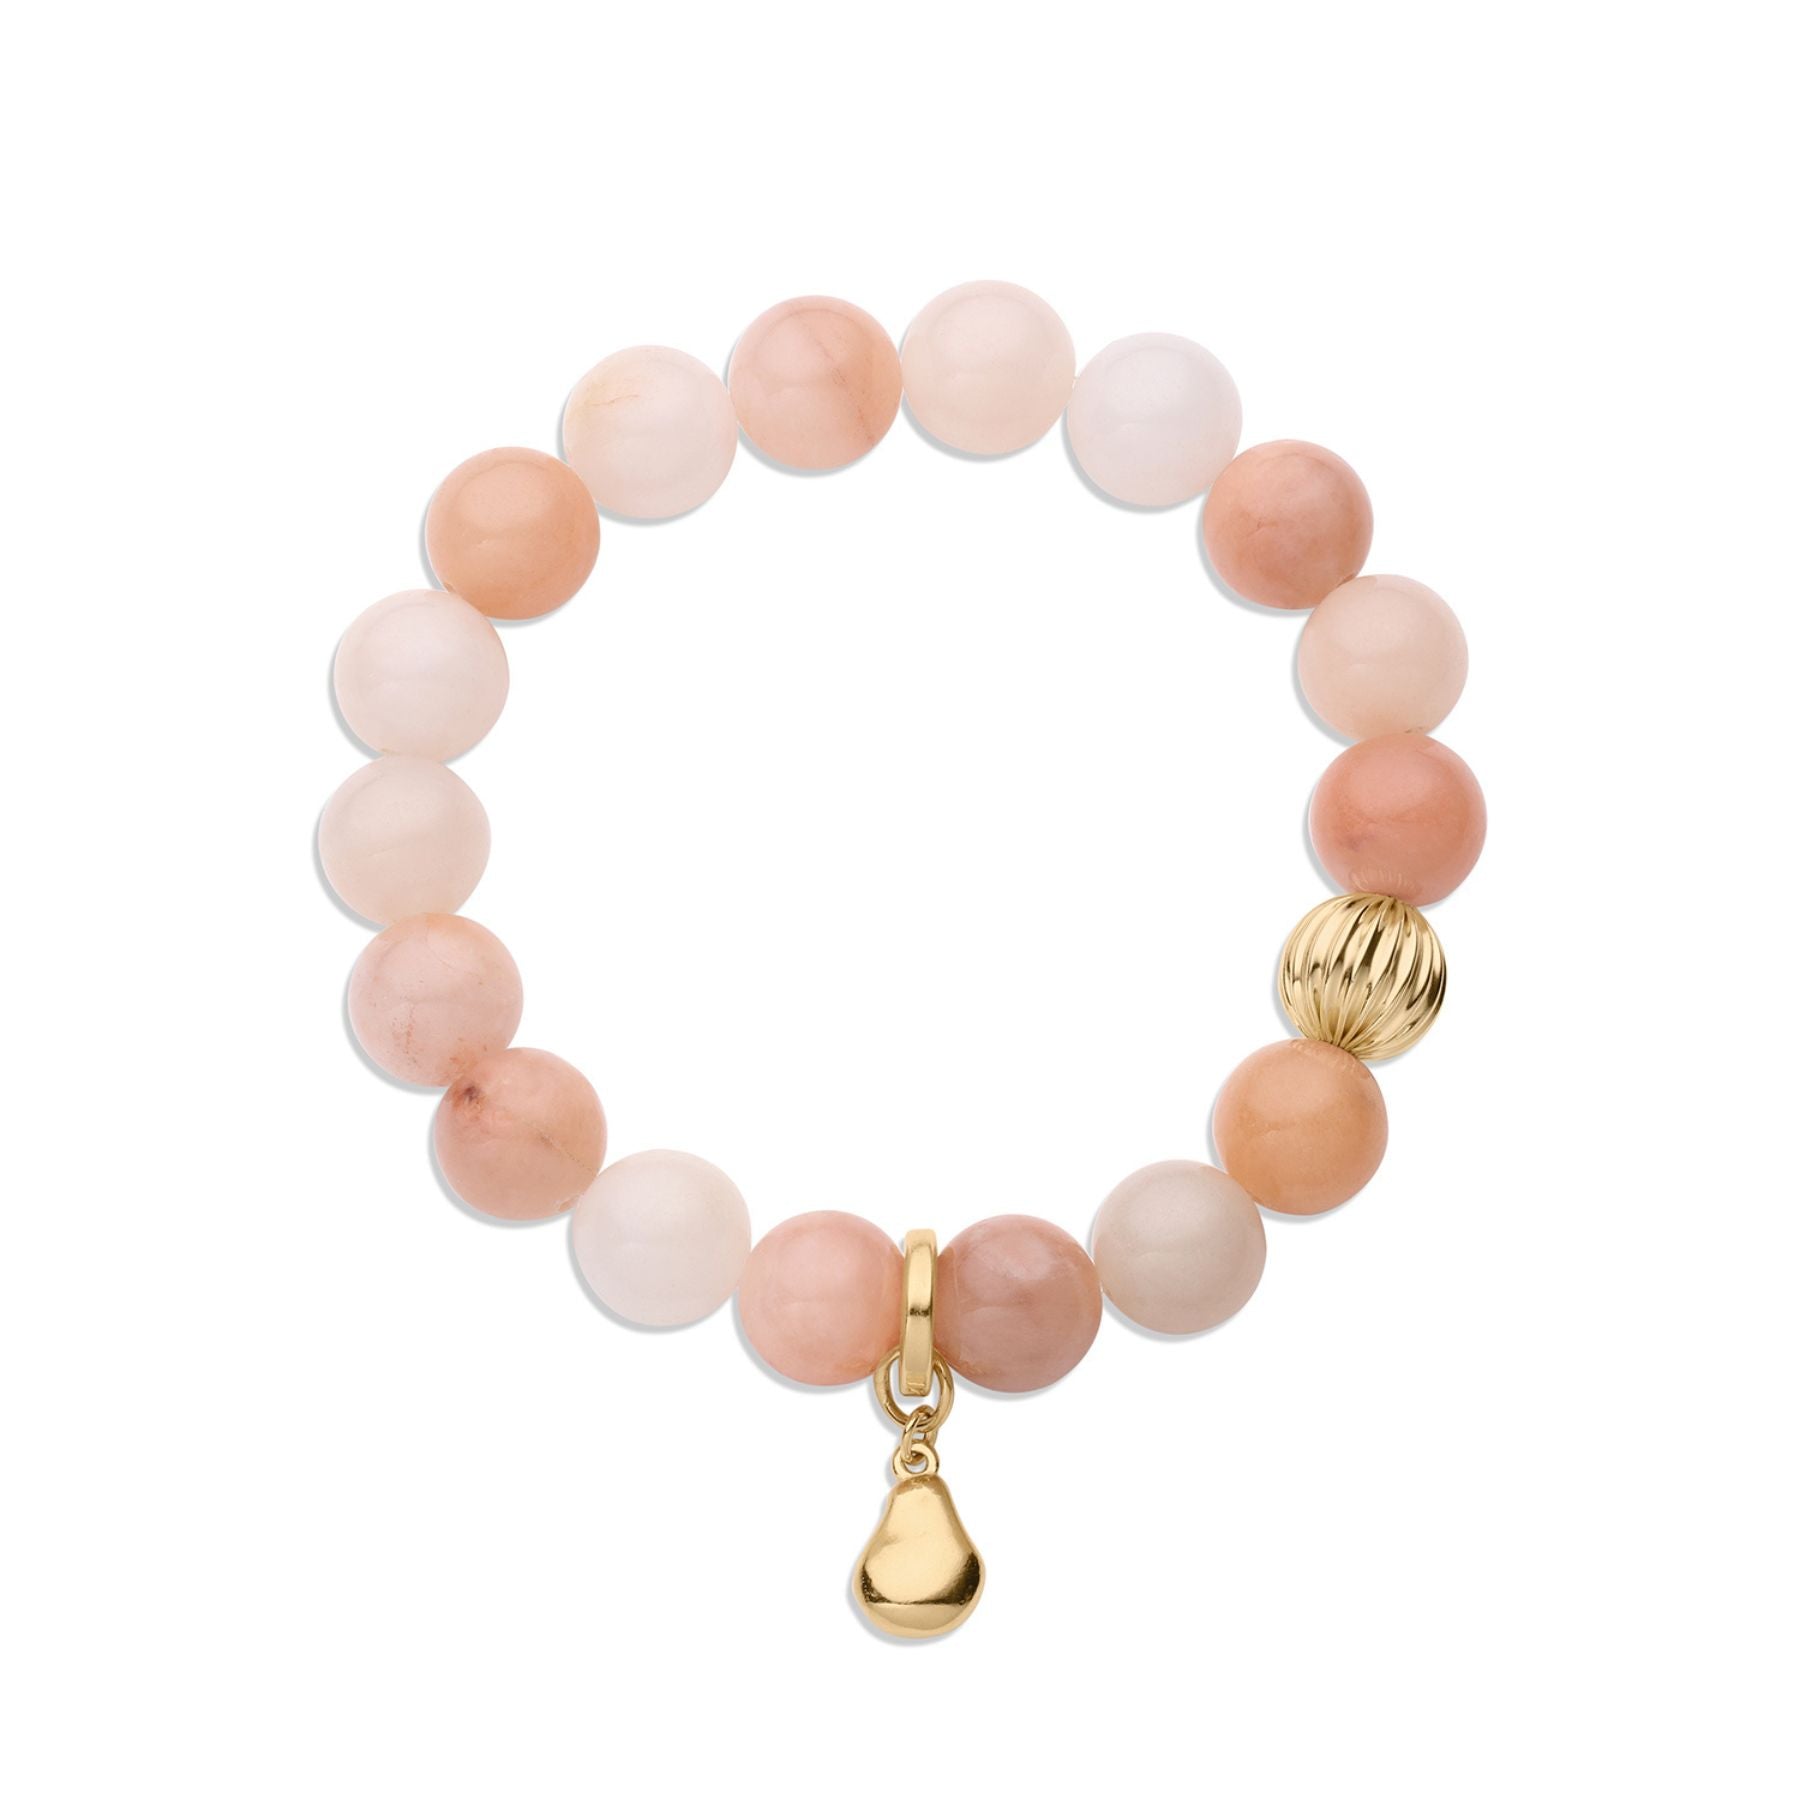 Peach aventurine beaded bracelet with gold corrugated bead and pear charm.